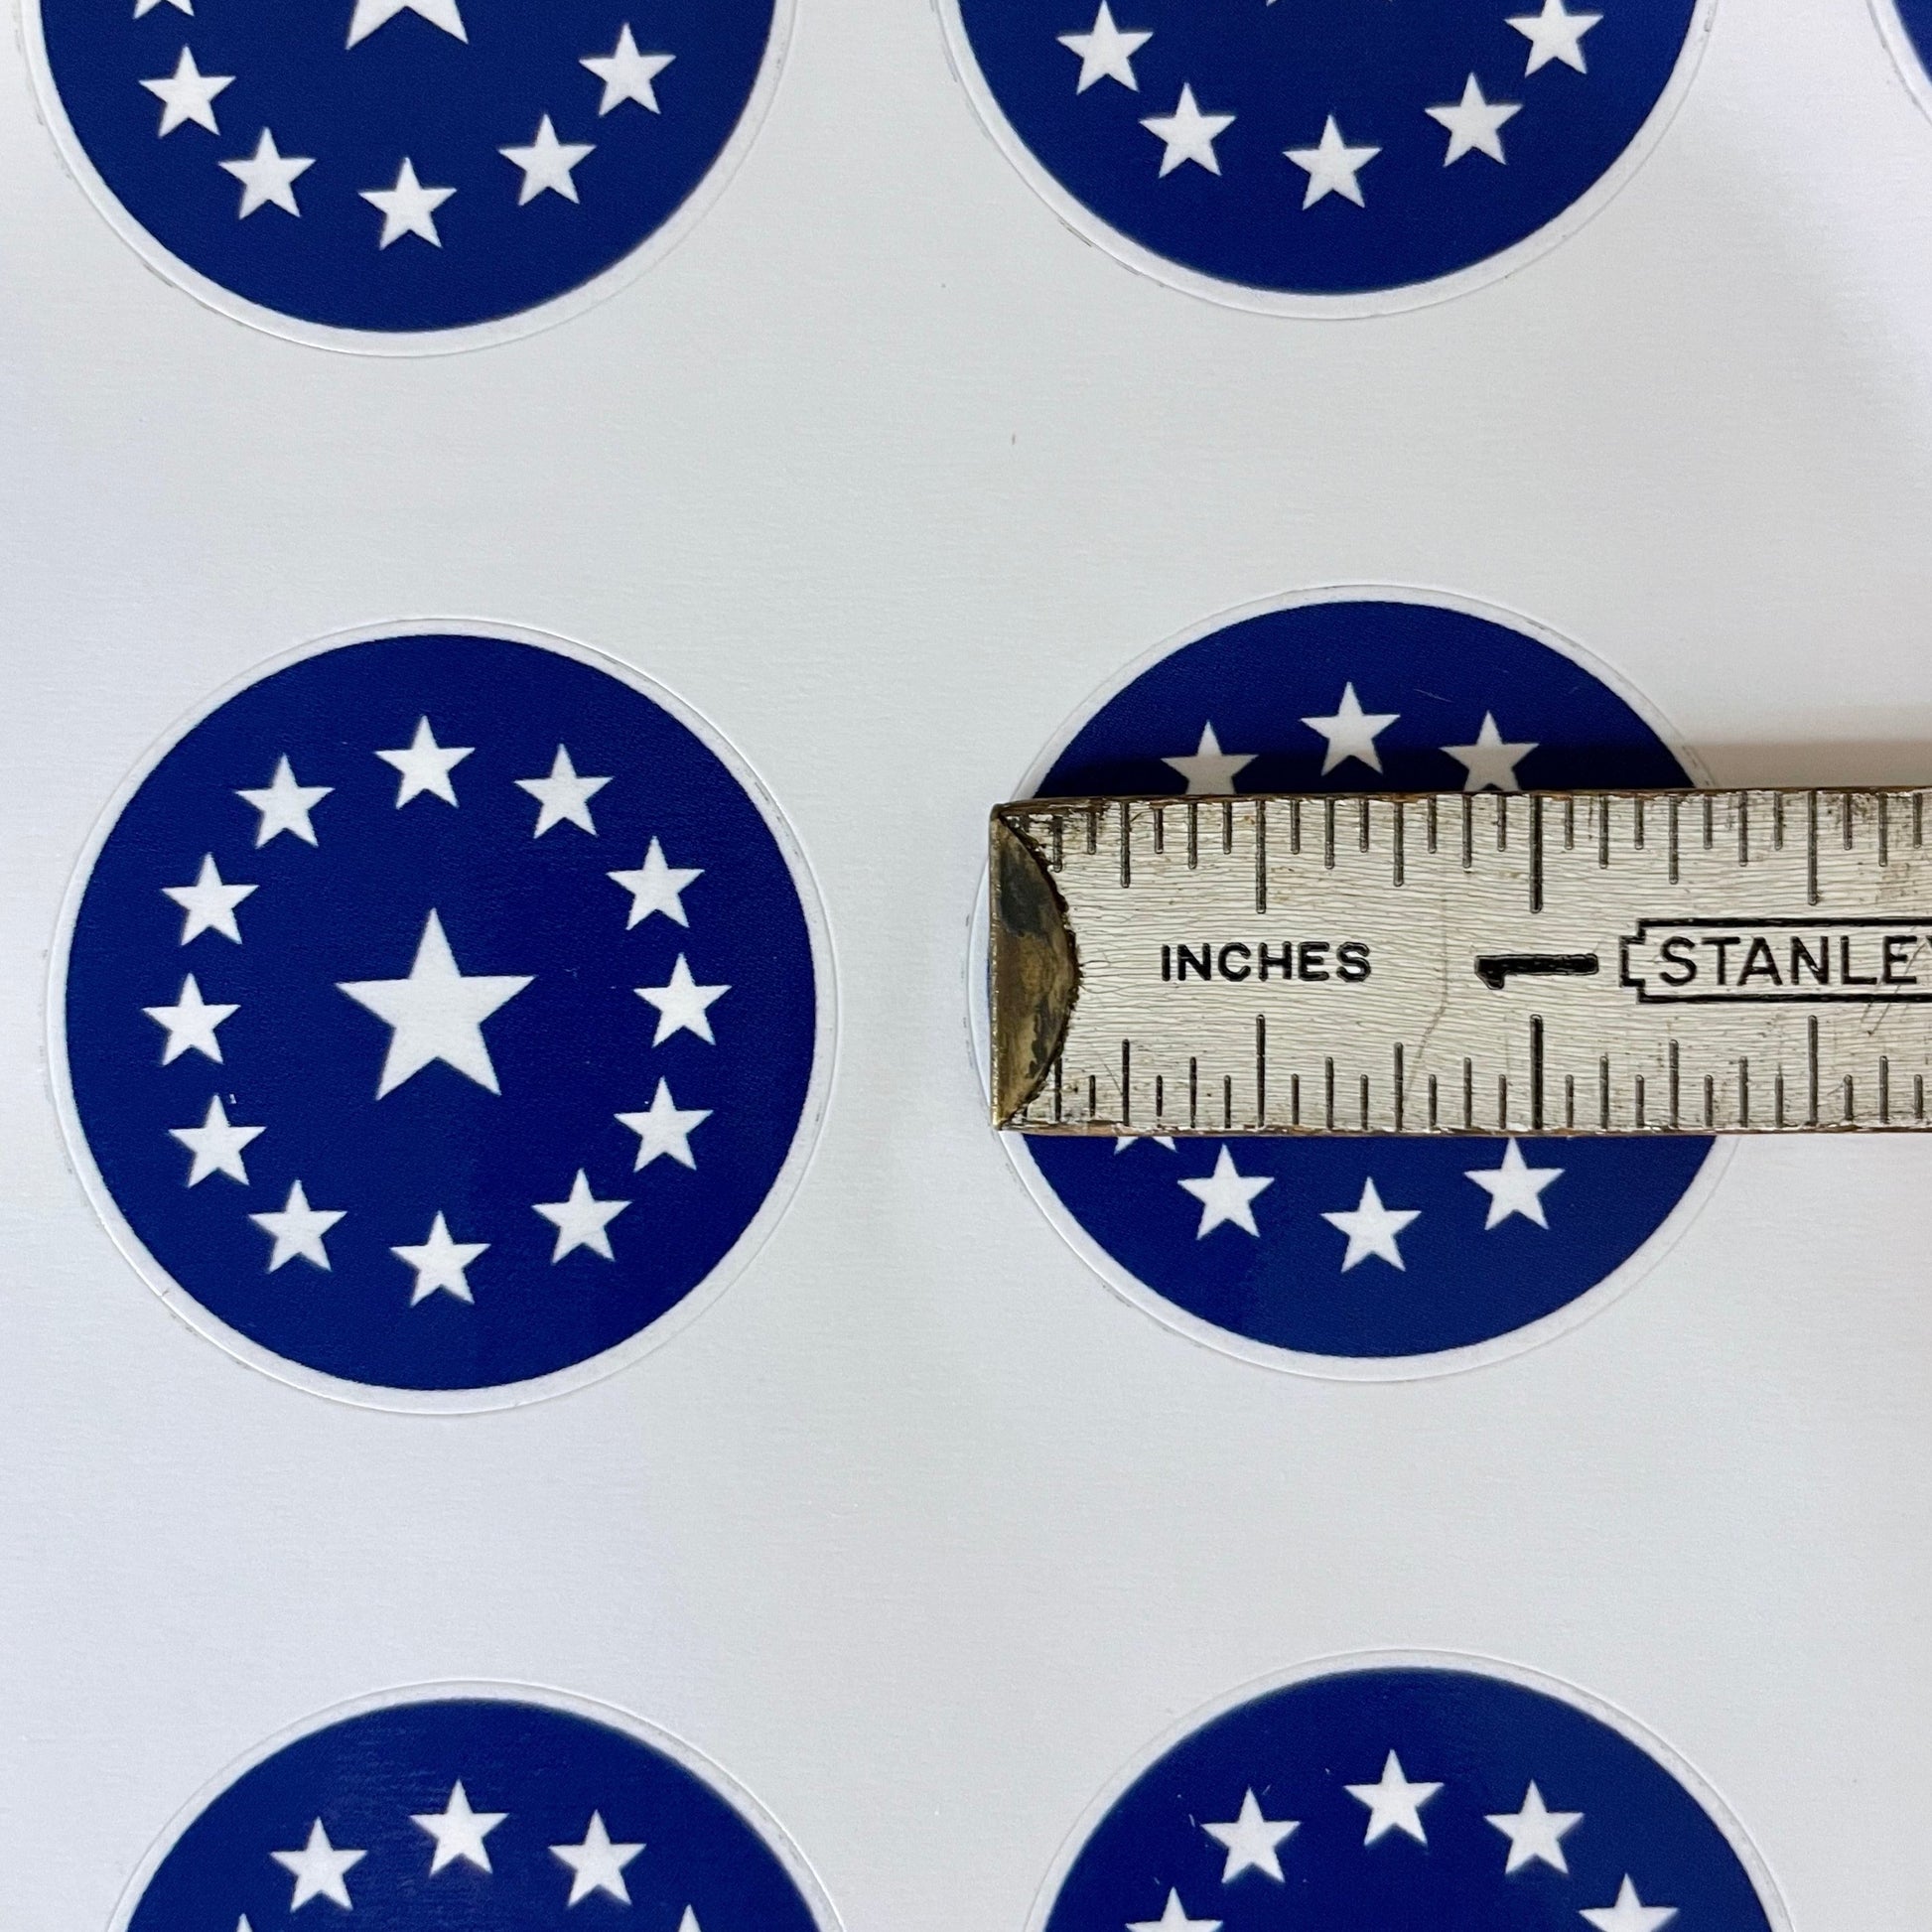 Deseret Territory Flag sticker in 1.5 inch size